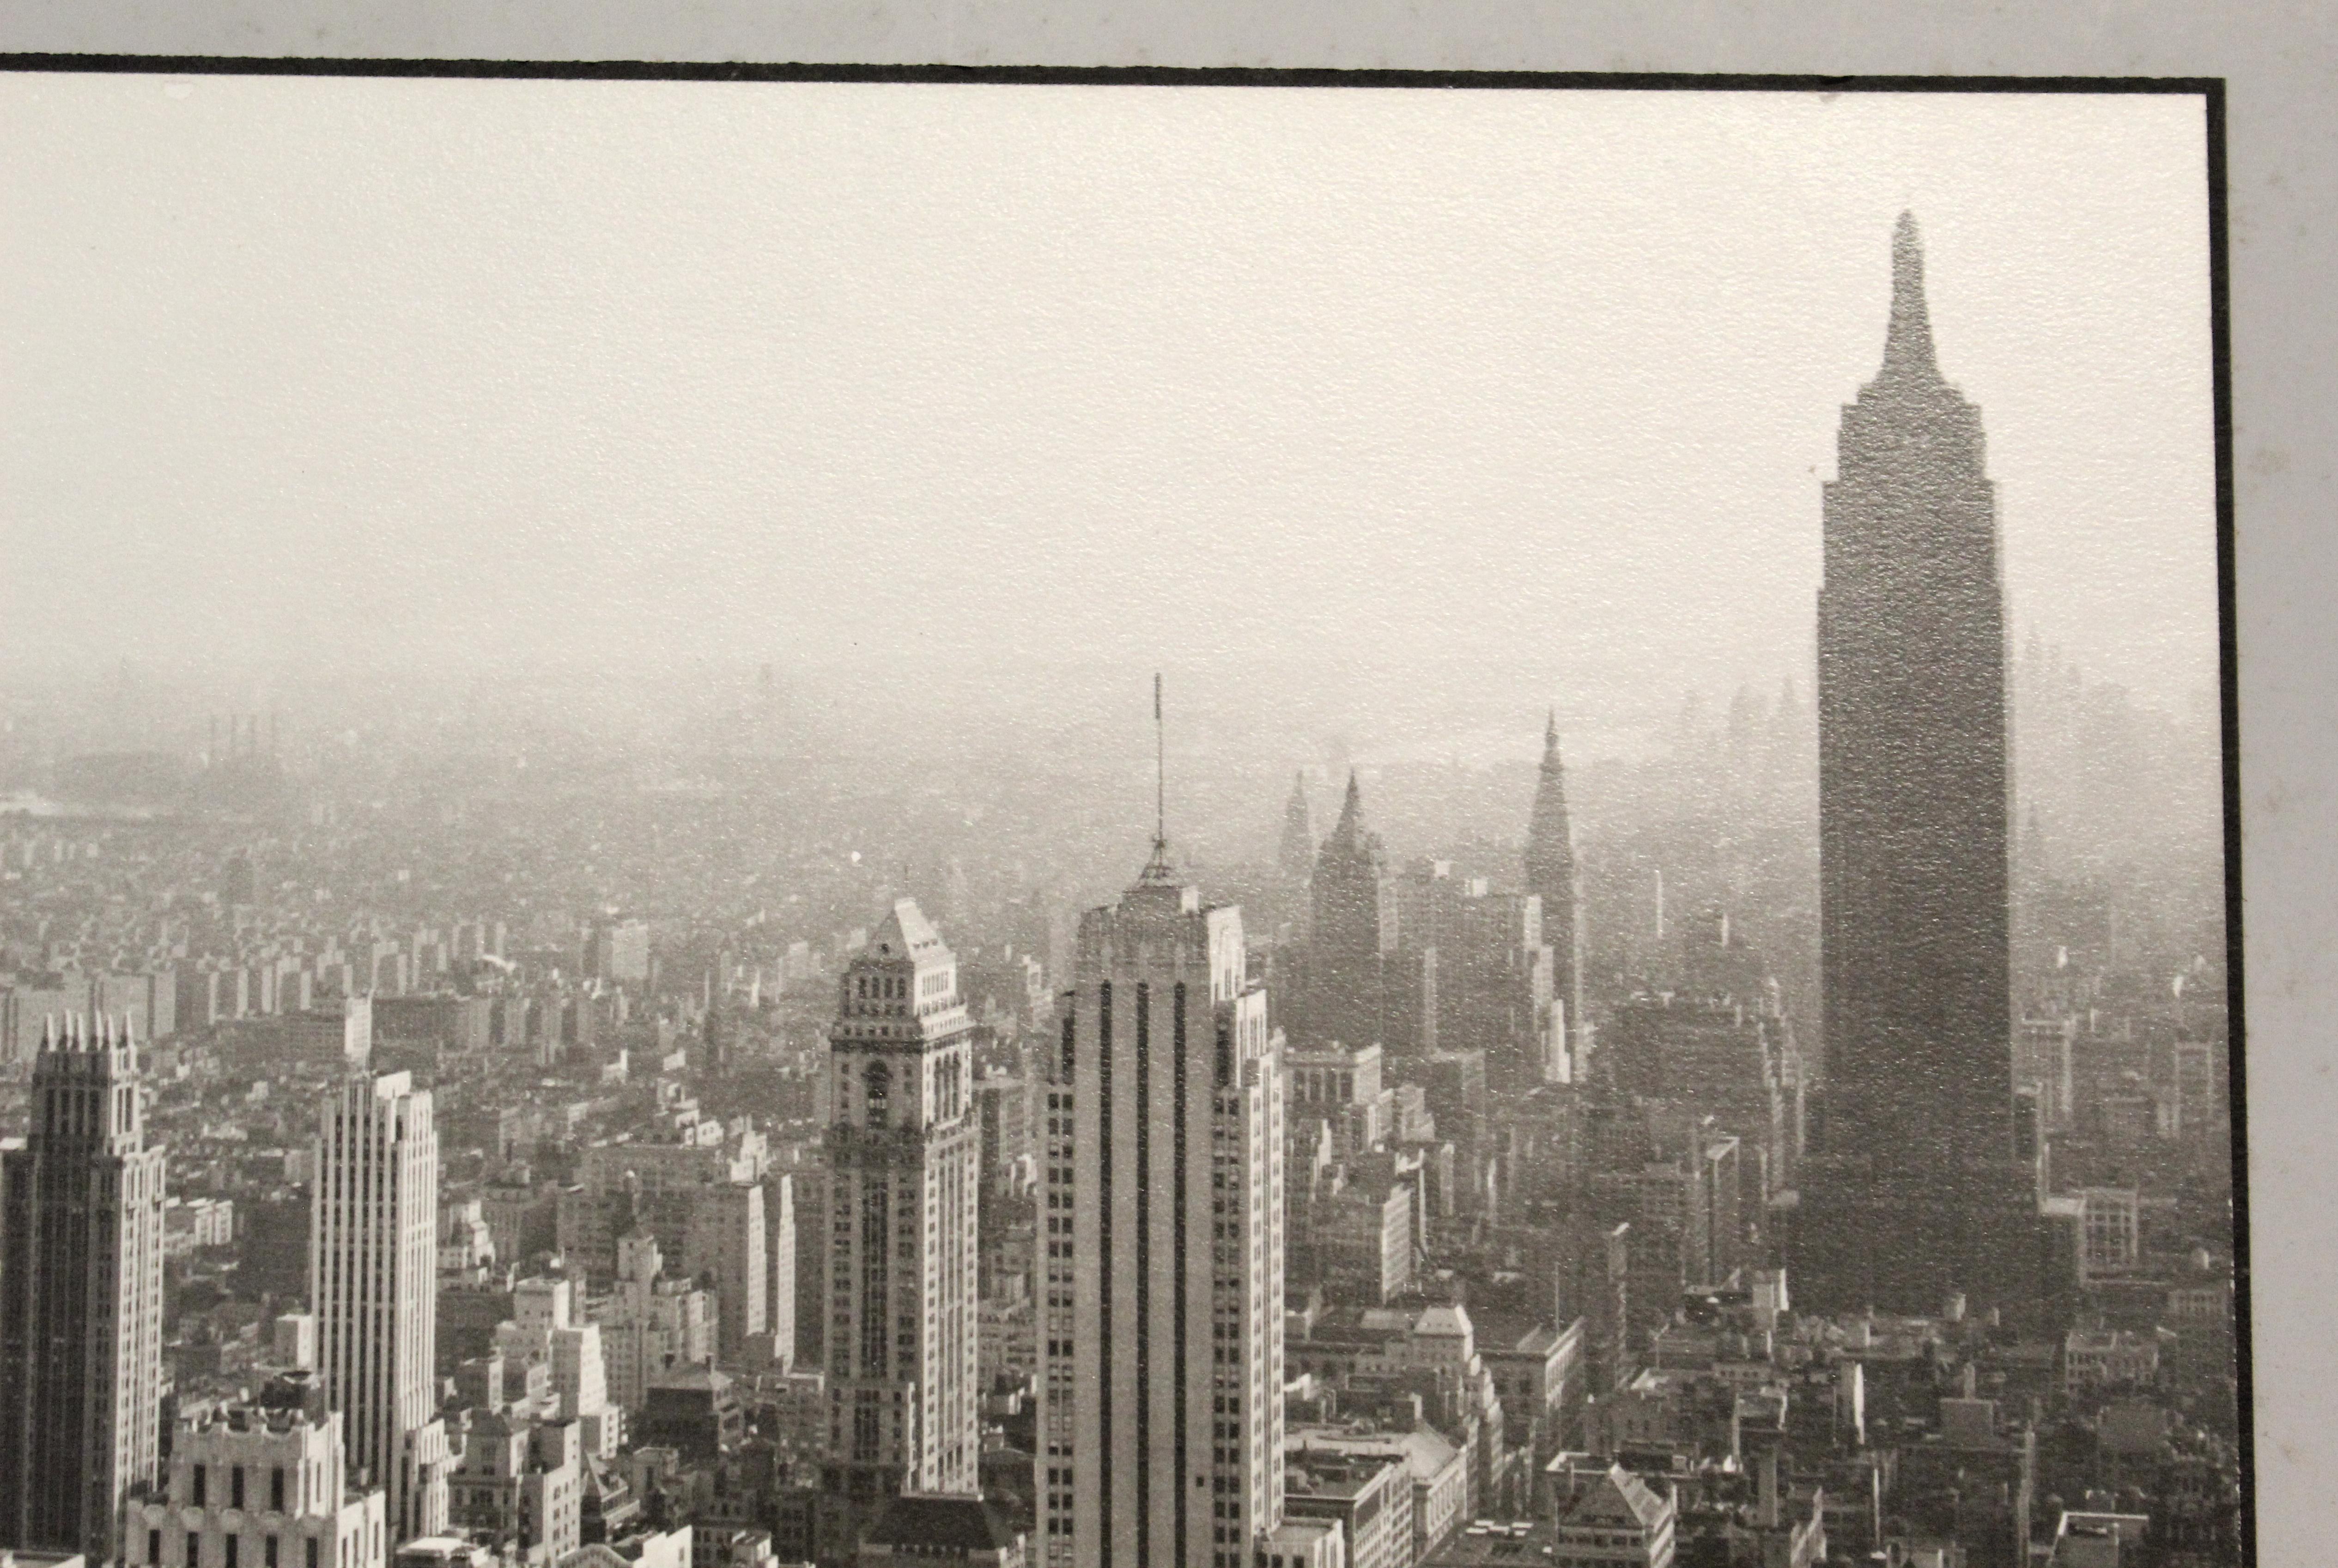 25/10 View from Rockefeller-Center Building - Gray Black and White Photograph by H. Surer